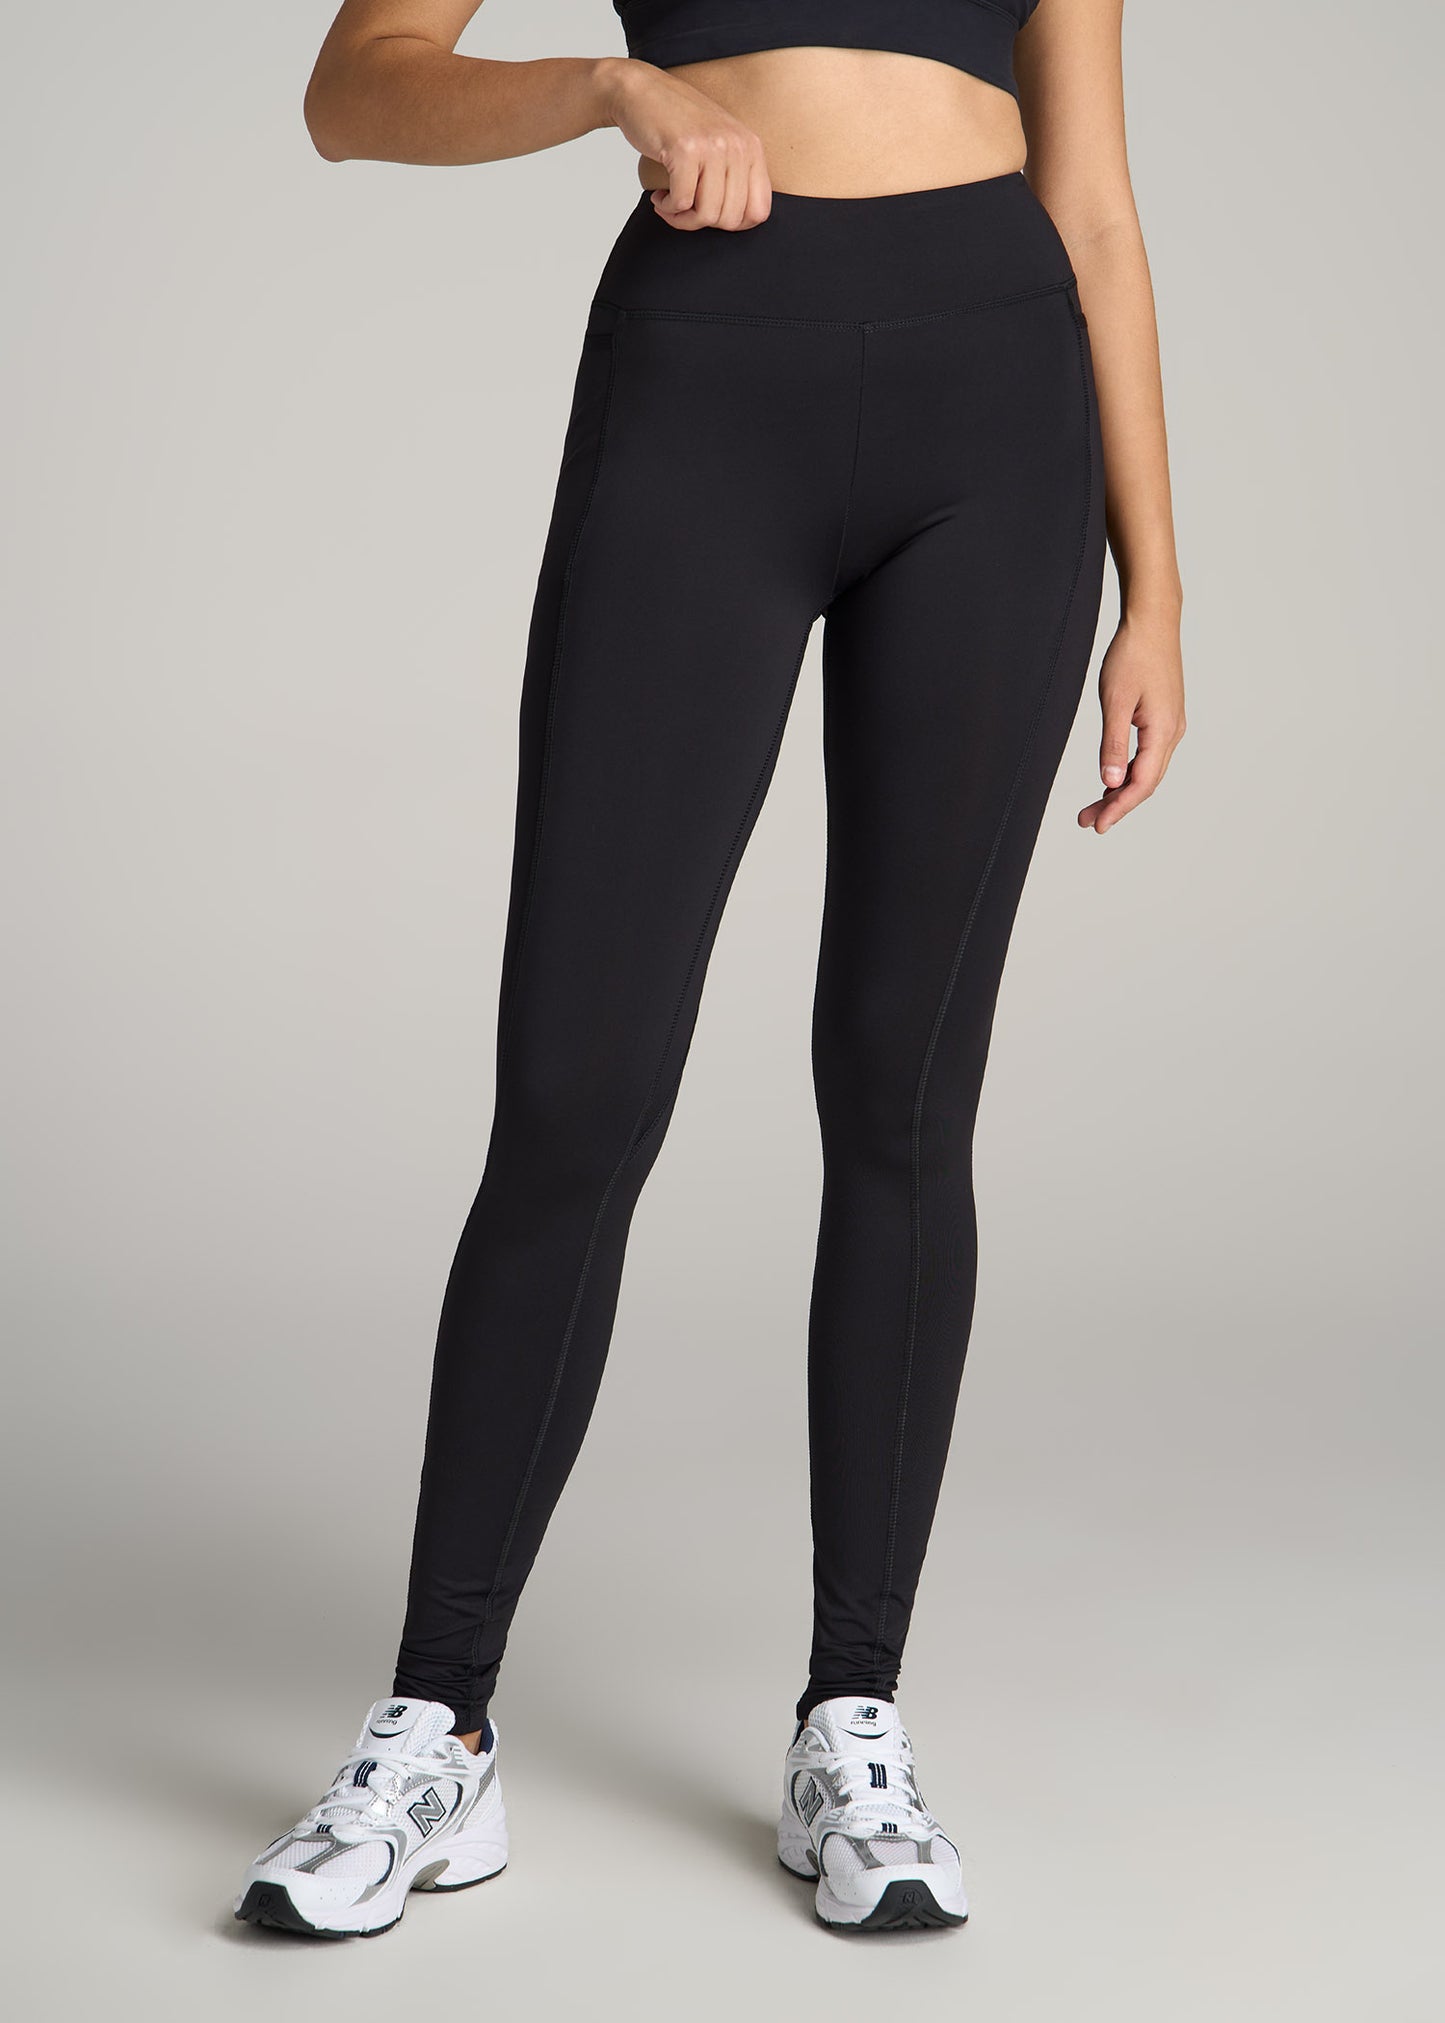 All Fit Women's Leggings with Pockets ( Black XL)